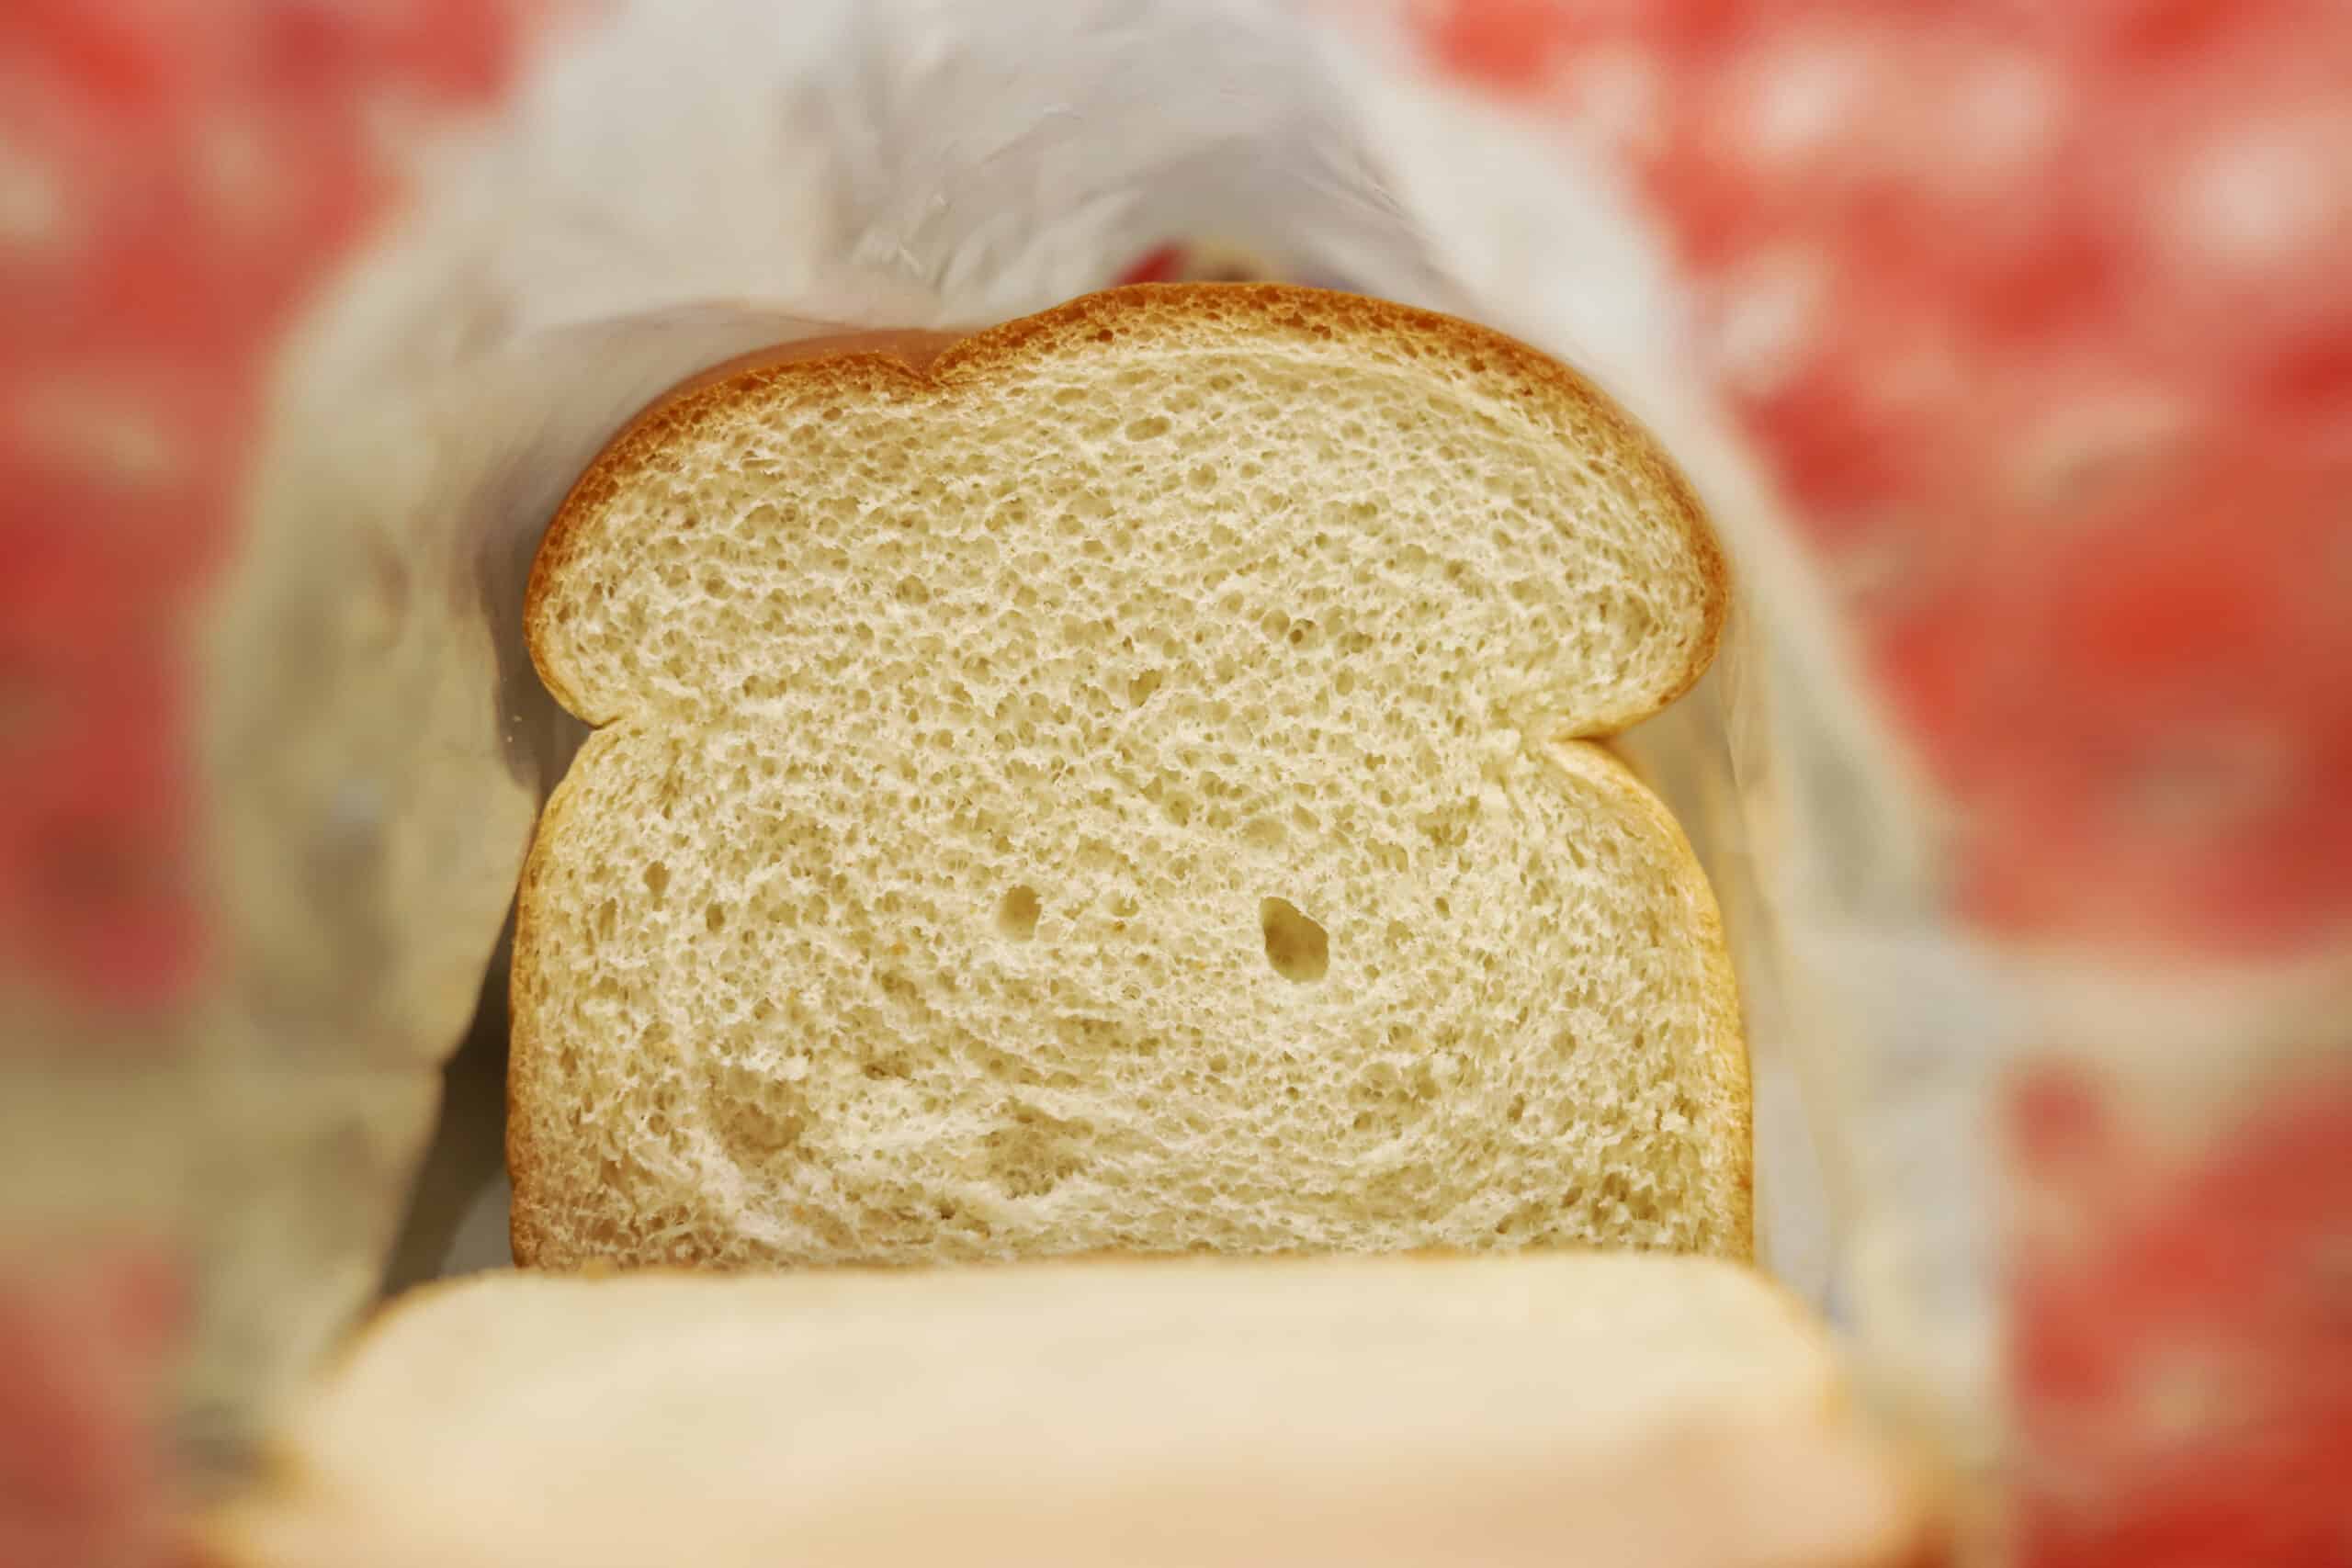 A close up image of a slice of white bread in a bag